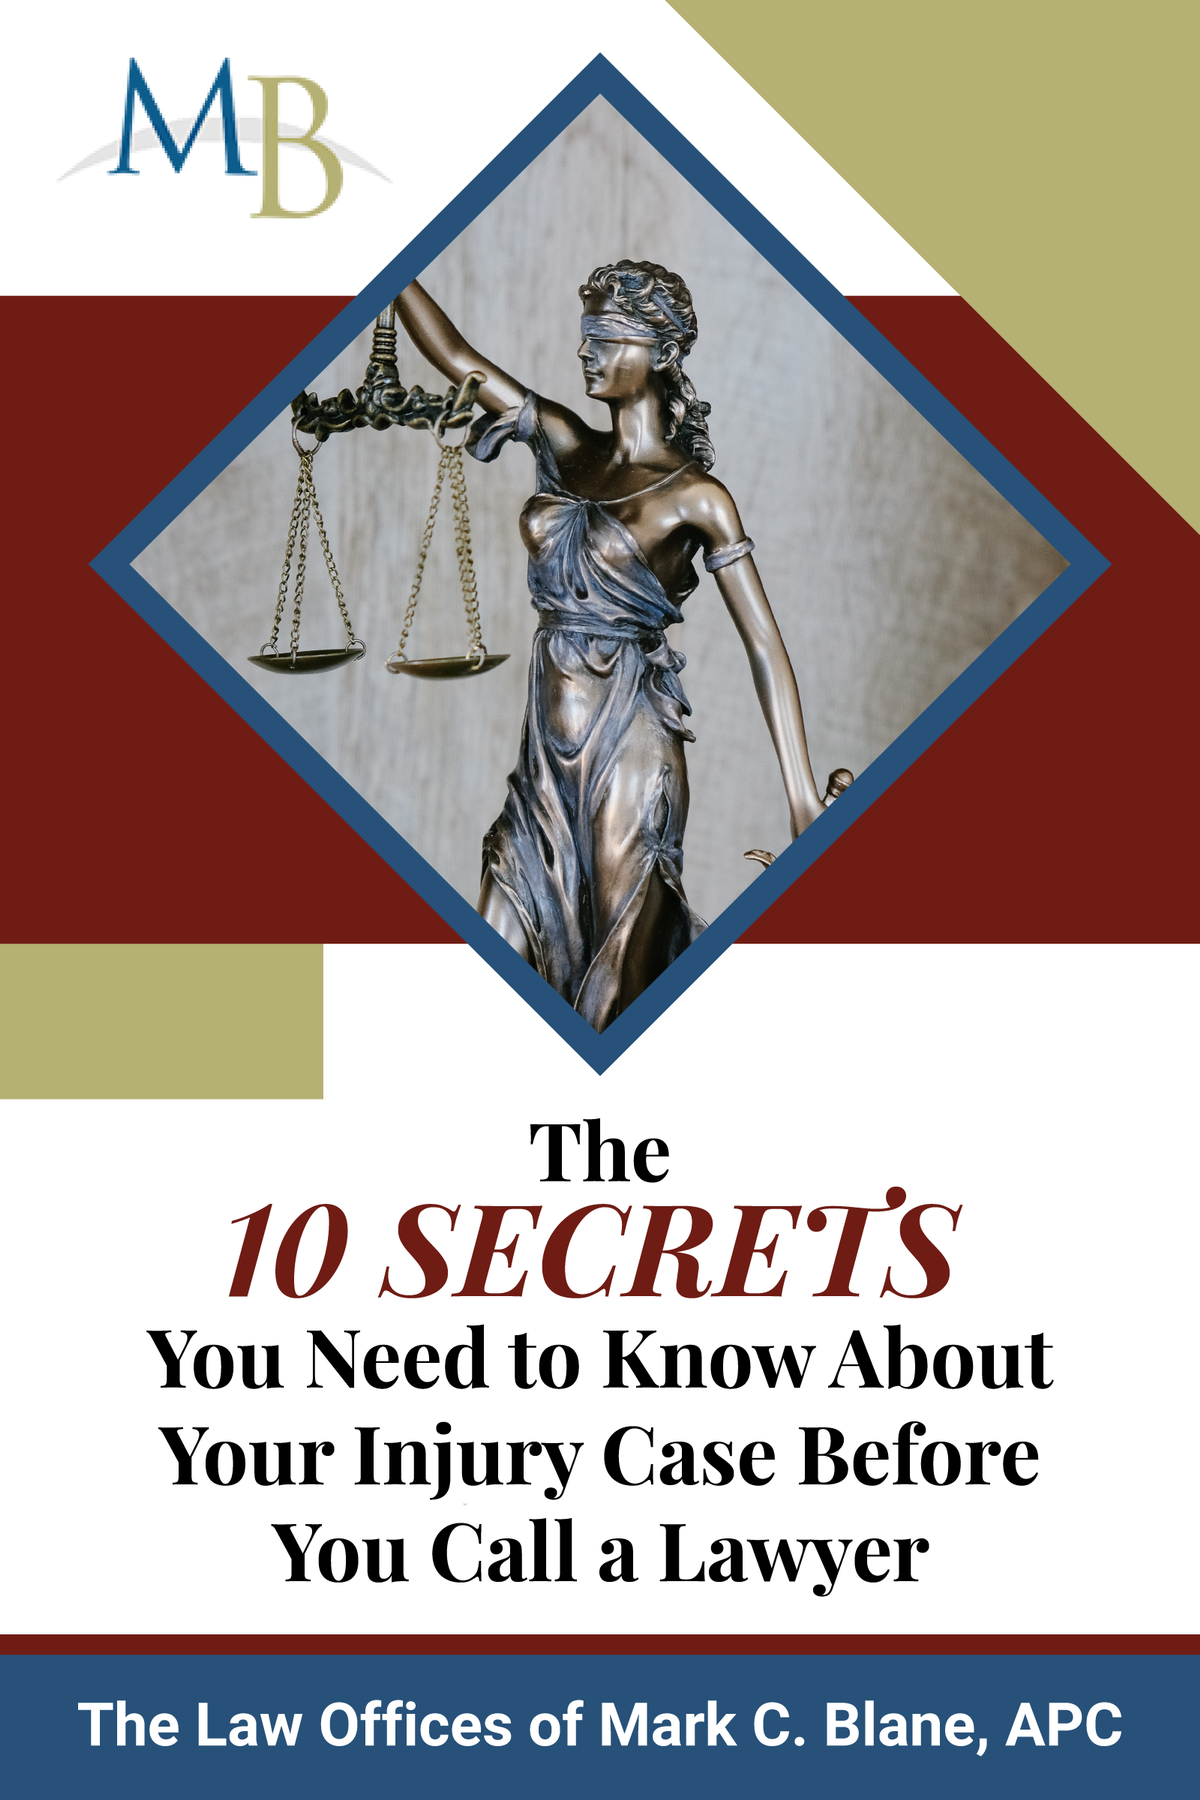 Ten Secrets With Your Injury Case Before You Call a Lawyer